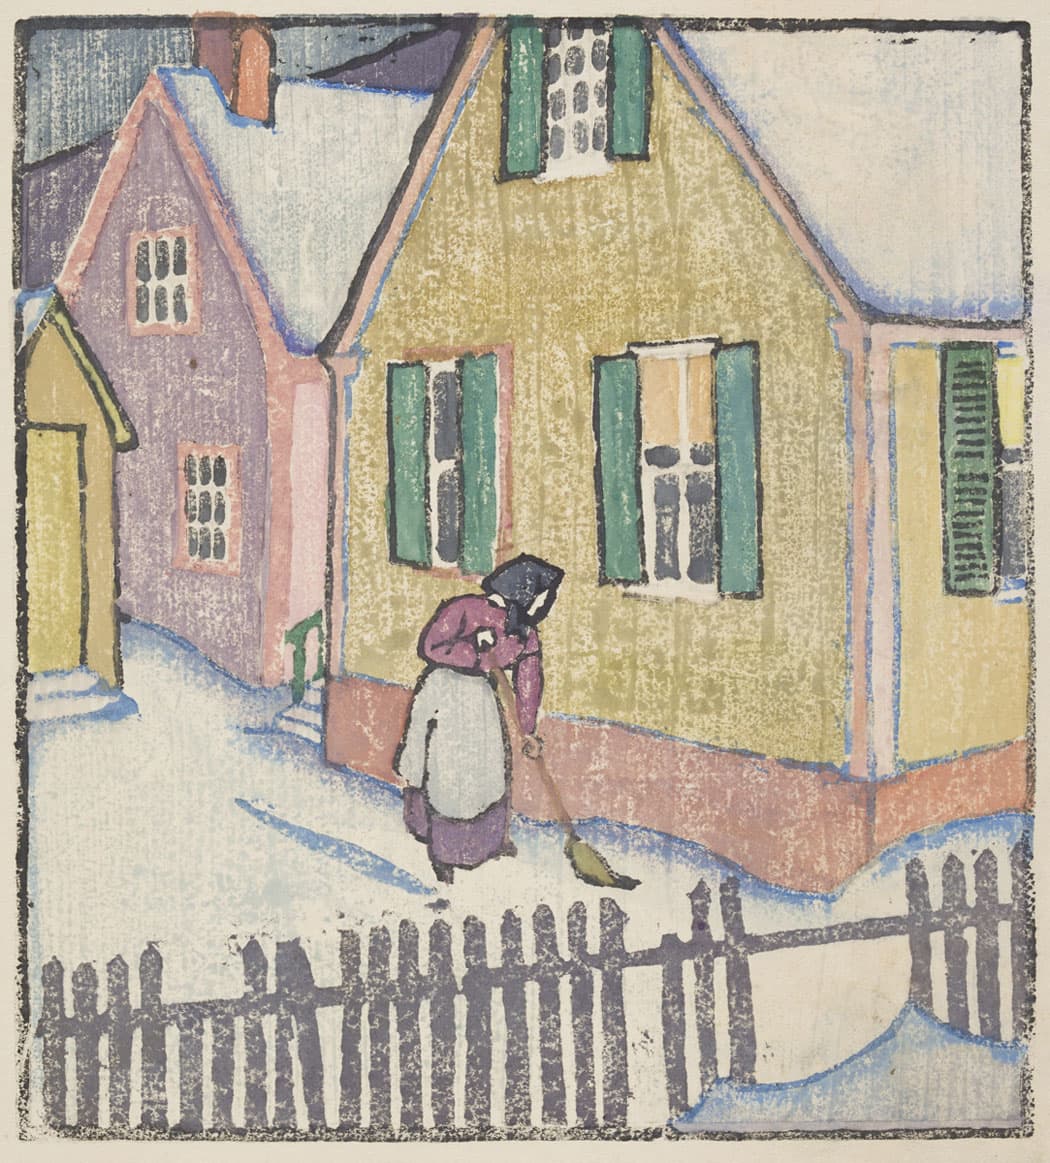 The American artist Maud Hunt Squire spent time in Paris in the first decade of the 20th century—including visits to Gertrude Stein's salons where she met Picasso and Matisse. Her woodcut "Sweeping the Snow" from around 1919 dates to the period around World War I when she and her life partner Ethel Mars settled in Provincetown, and became part of a group of vanguard printmakers there, before returning to Europe in the 1920s. (Worcester Art Museum)